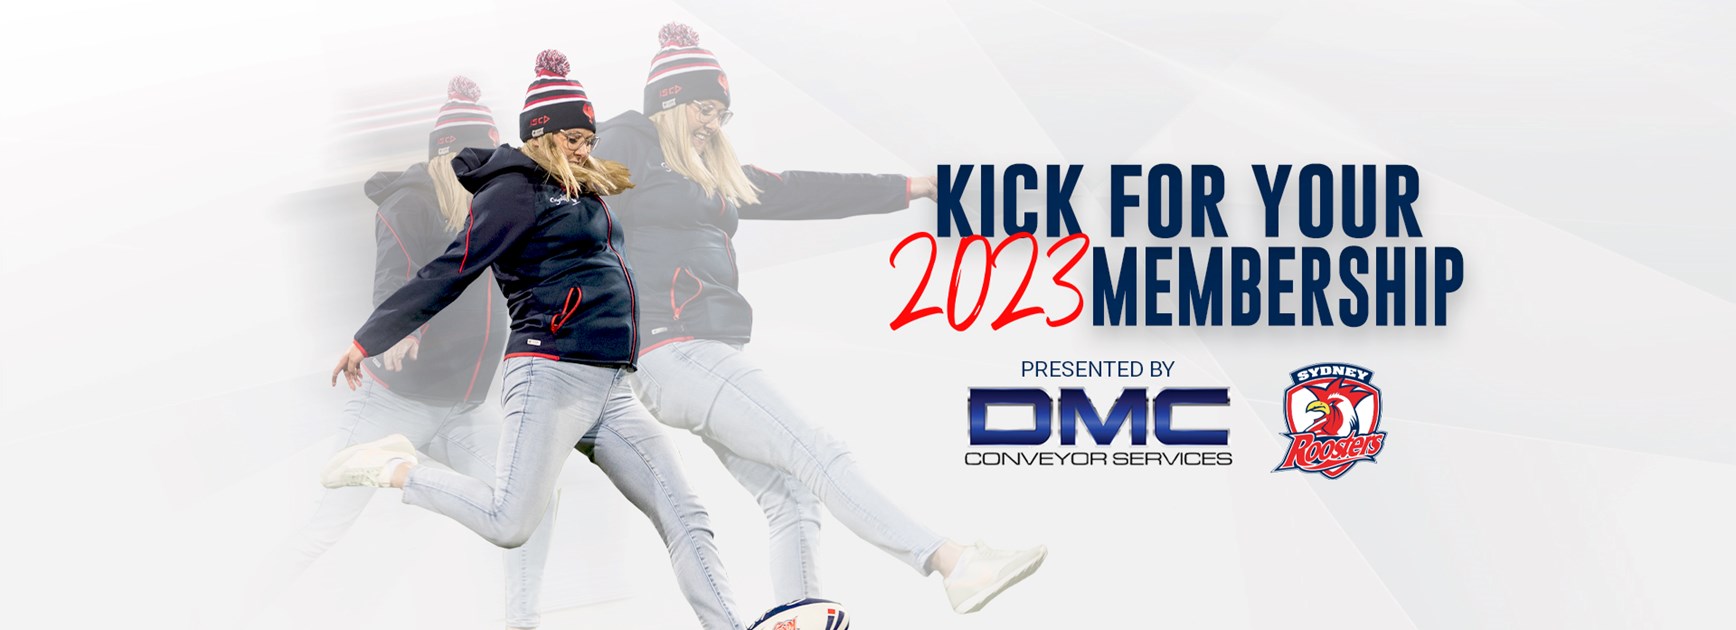 Kick For Your Membership Returns on the Central Coast!